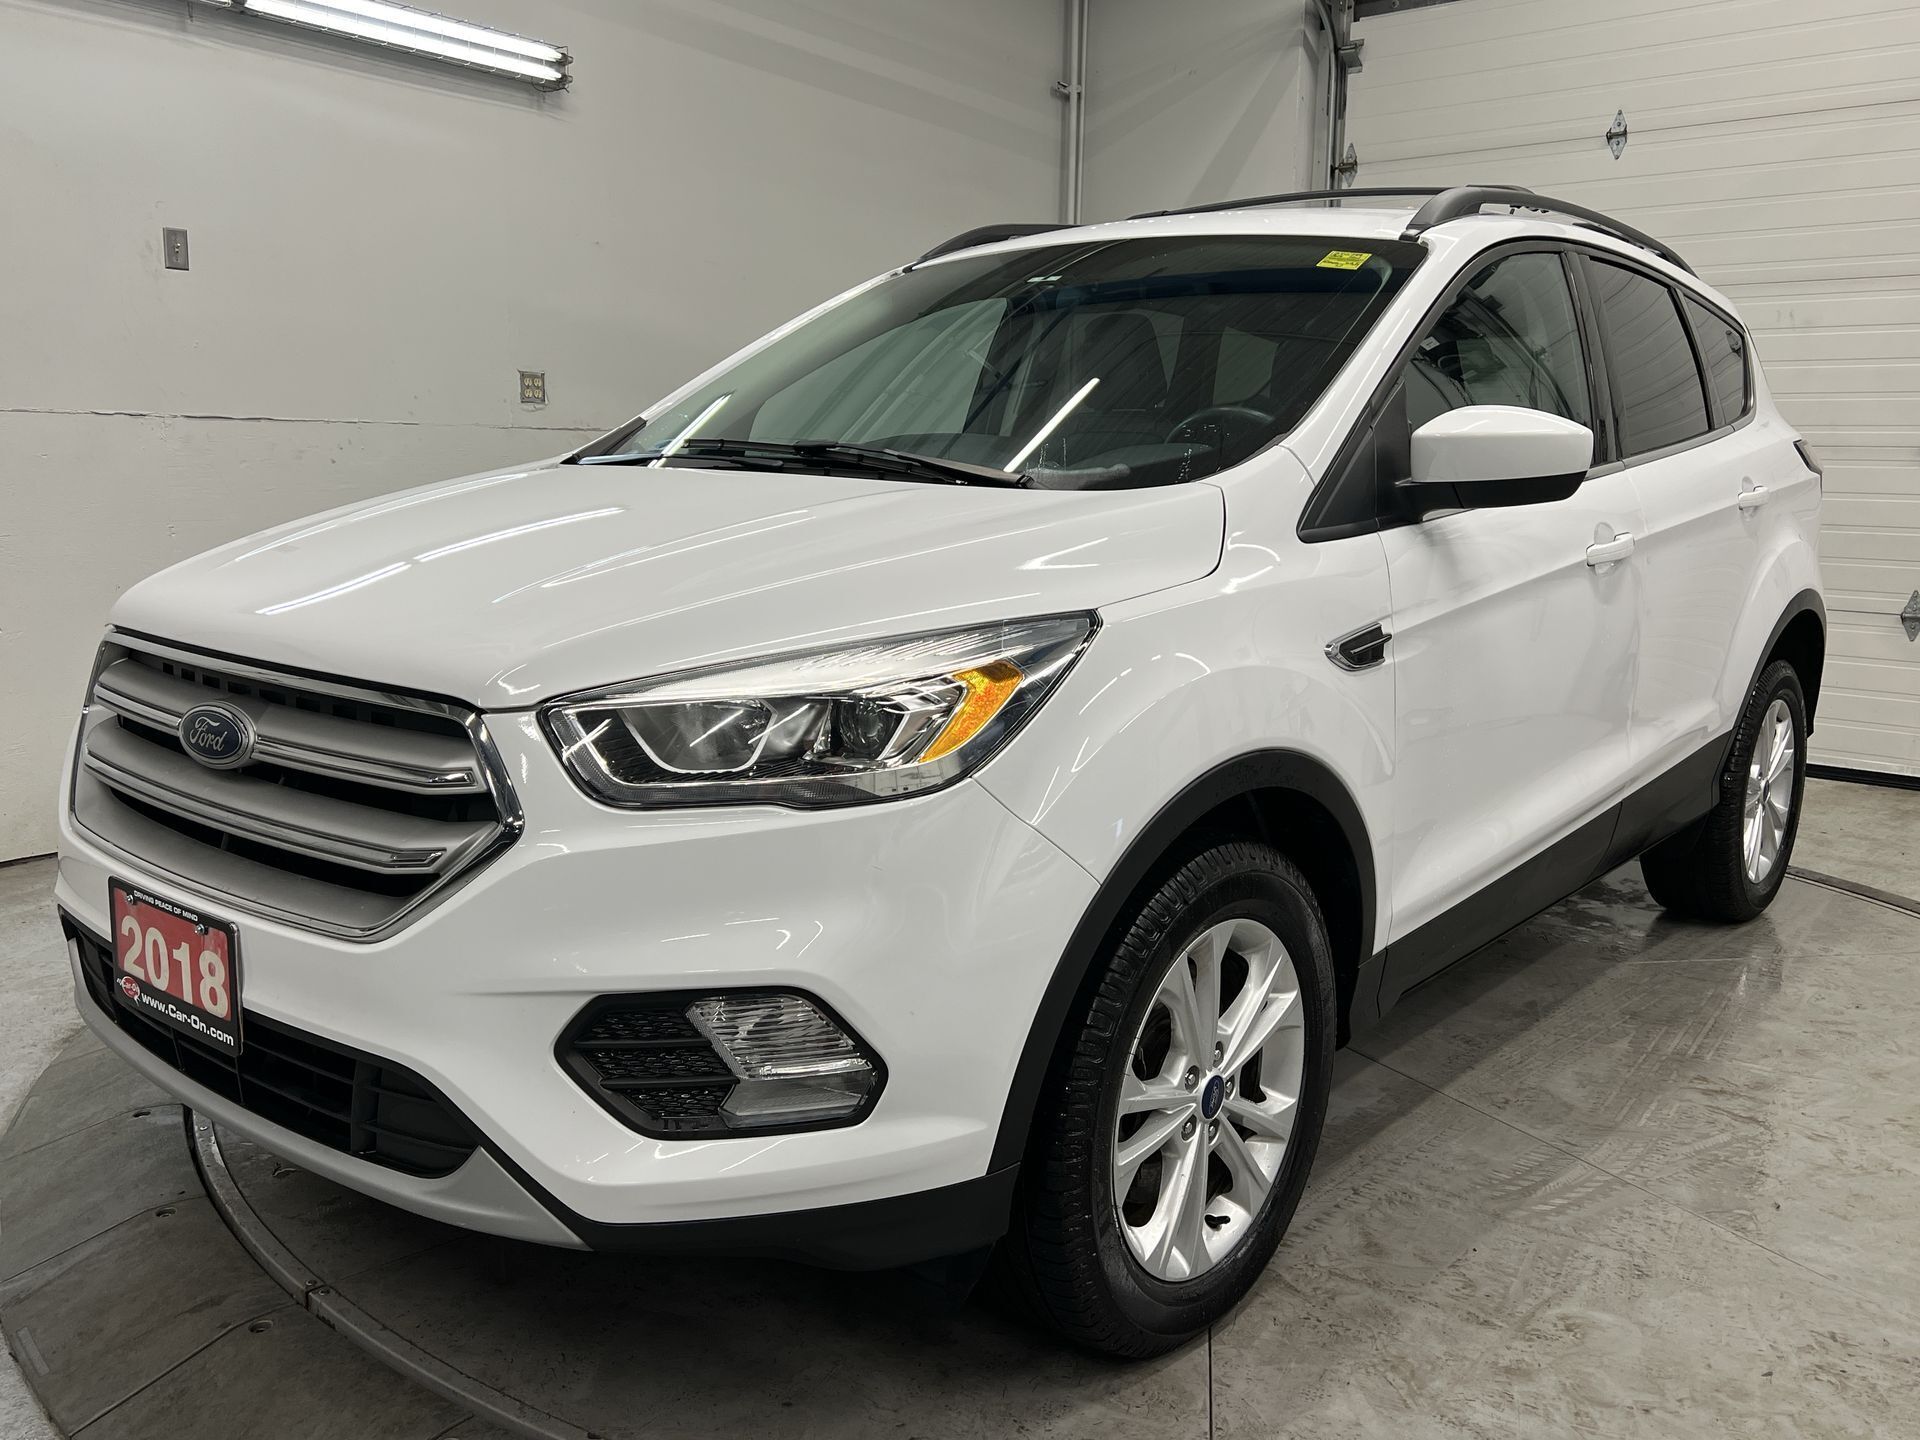 2018 Ford Escape SEL AWD| HTD LEATHER |CARPLAY |LOW KMS! |ROOF RACK